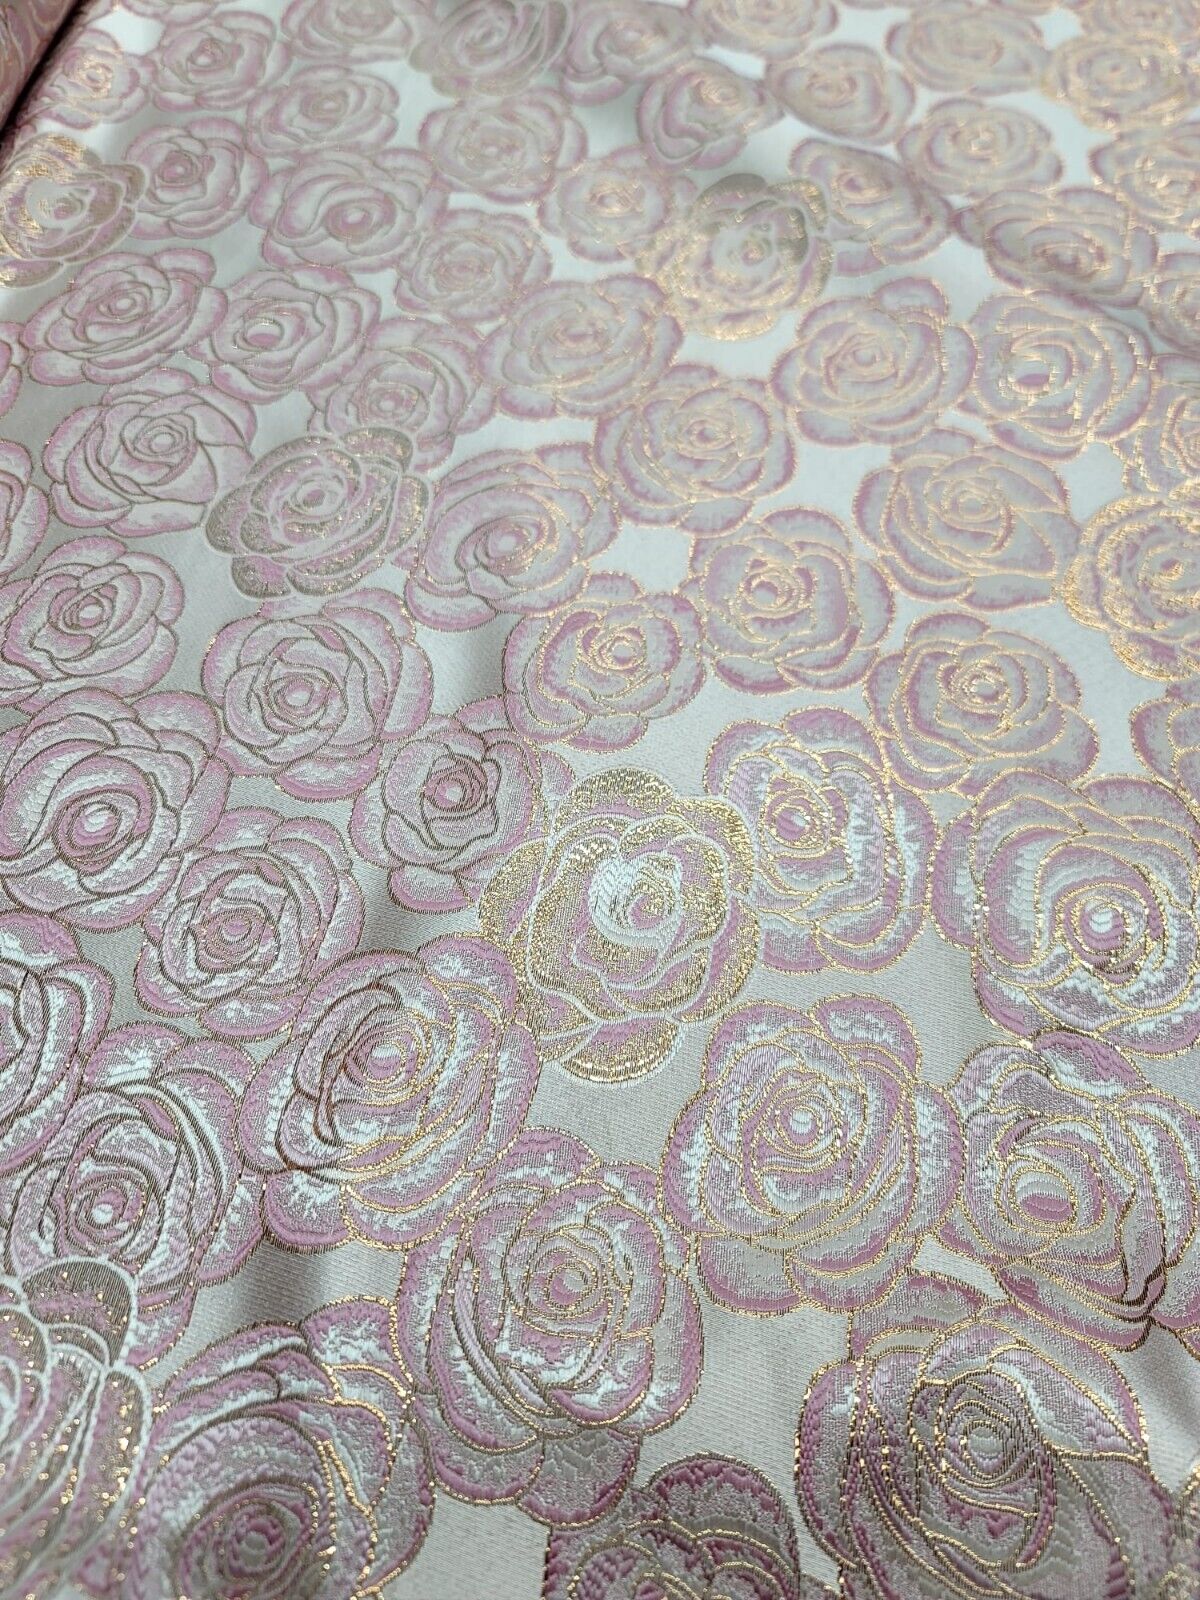 Pink Rose Floral Fabric by The Yard Prom Bridal Quinceañera Beige Backgr